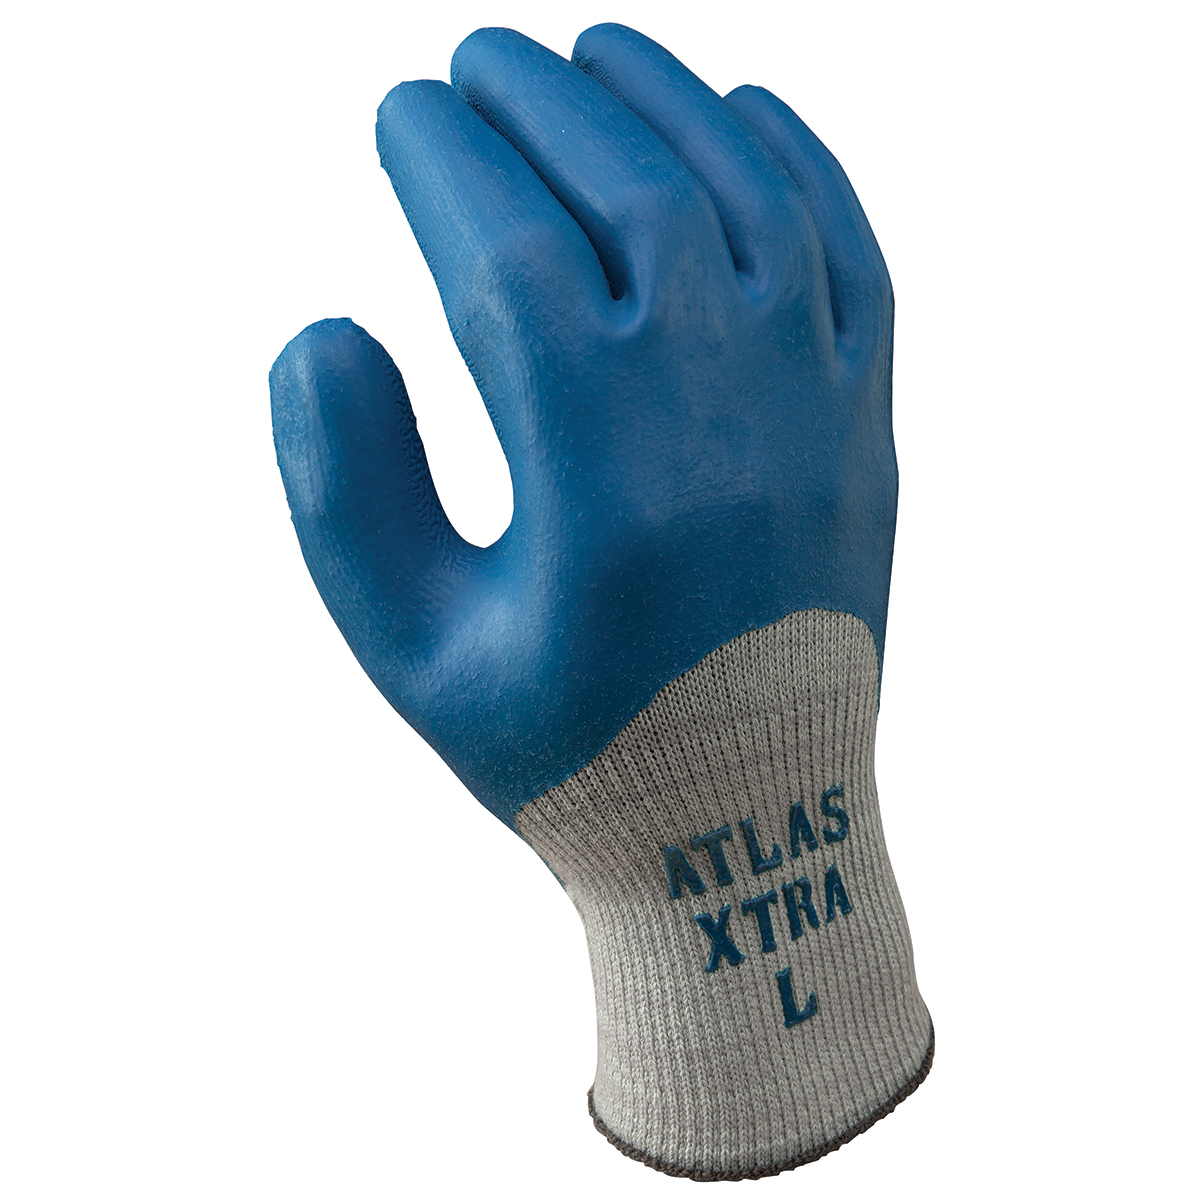 SHOWA® Size 10 ATLAS® 10 Gauge Natural Rubber Full Hand Coated Work Gloves With Cotton And Polyester Liner And Knit Wrist